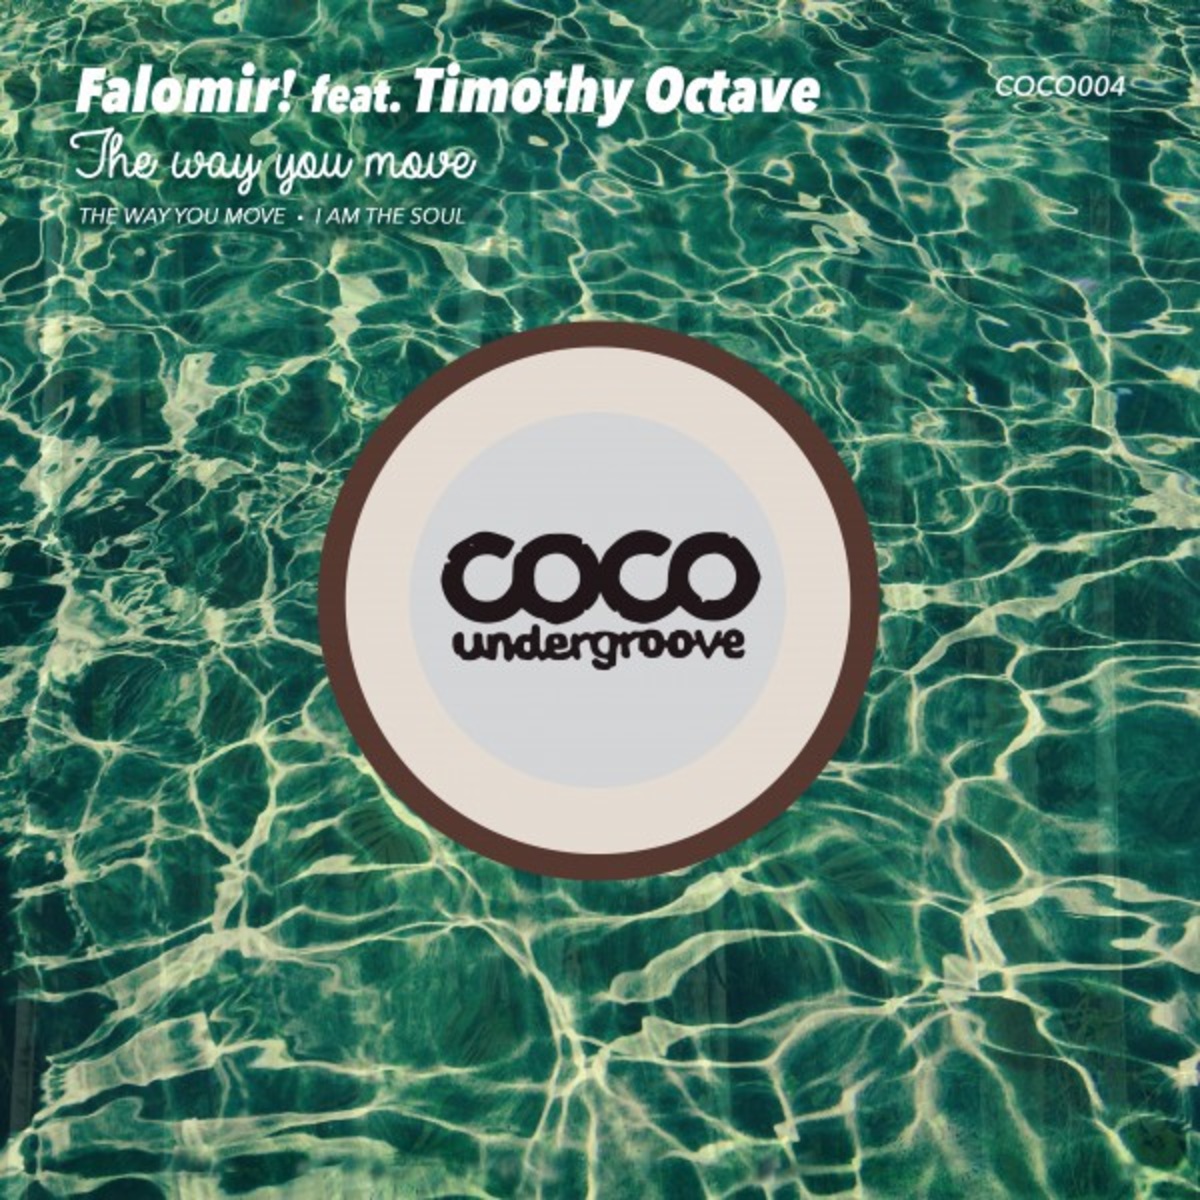 Falomir! ft Timothy Octave - The Way You Move / Coco Undergroove